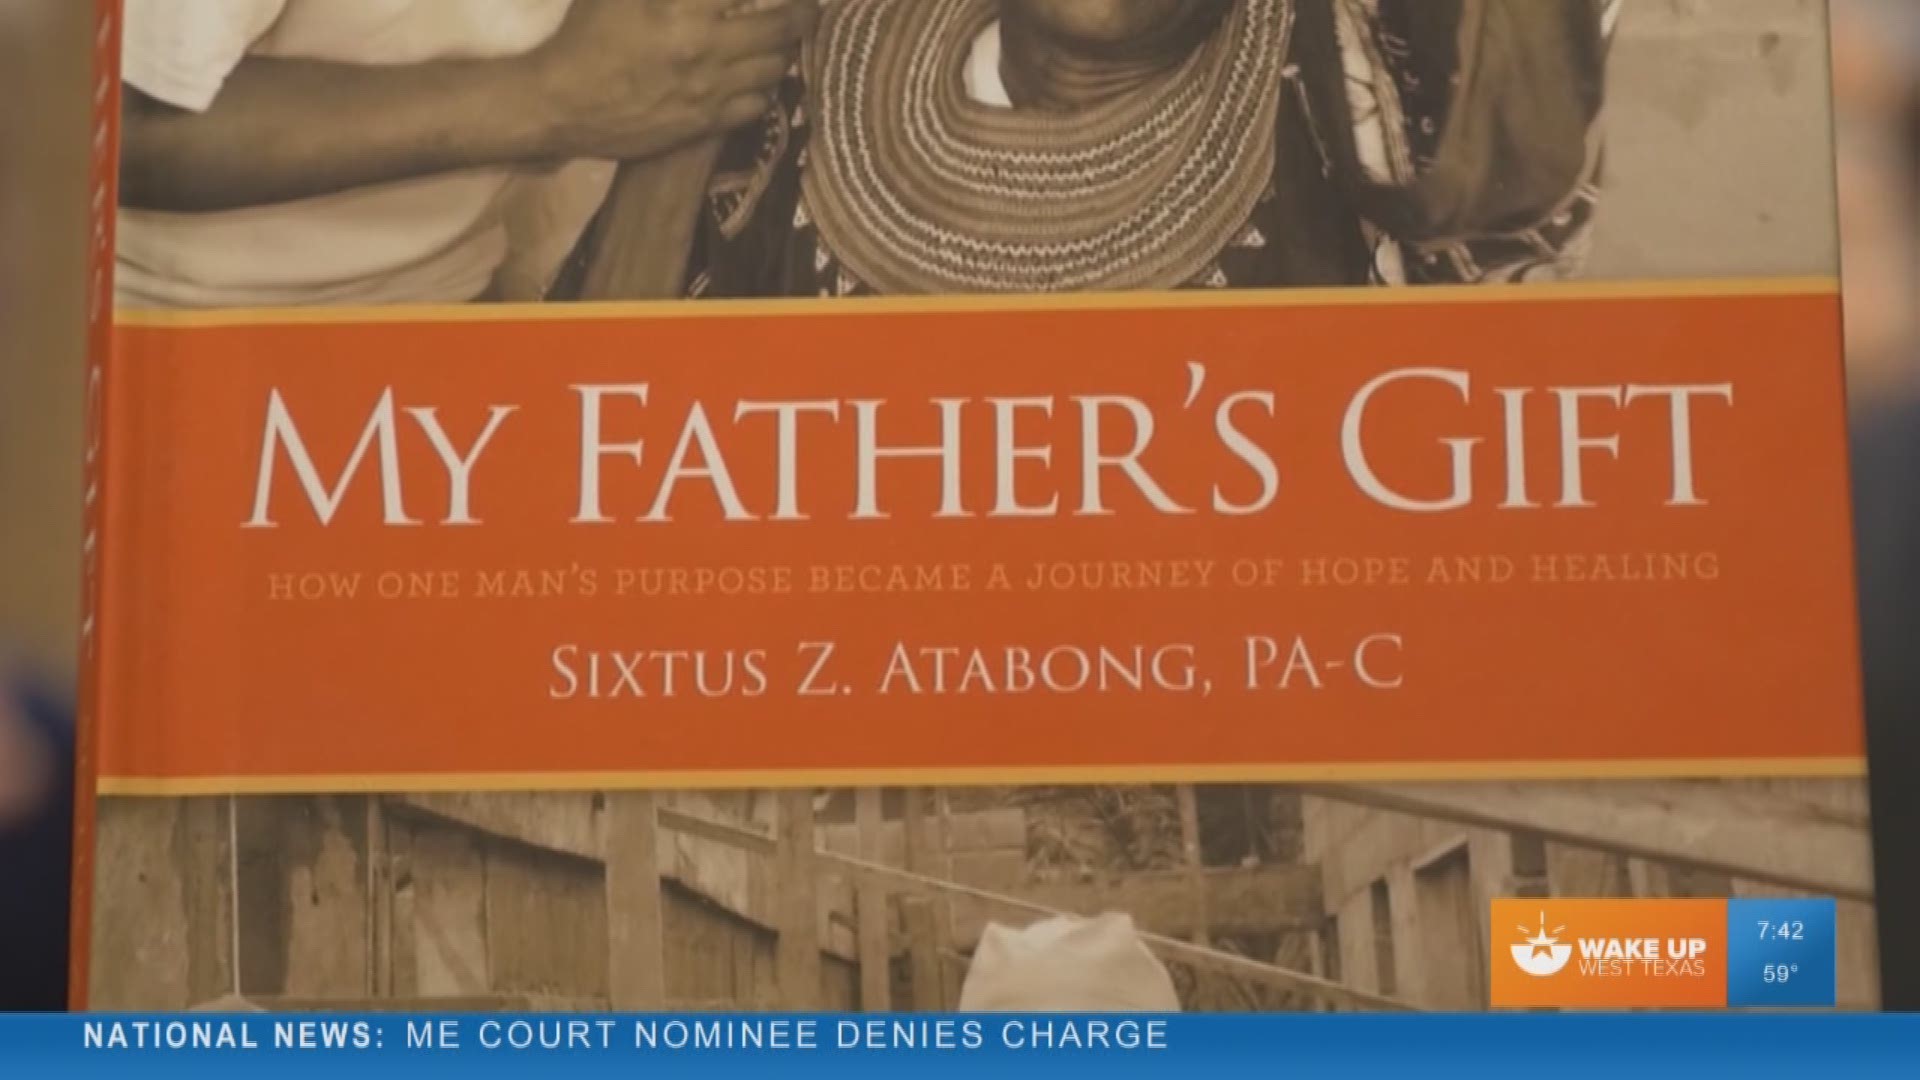 #MakeADifferenceMonday: Sixtus Atabong, author of "My Father's Gift"